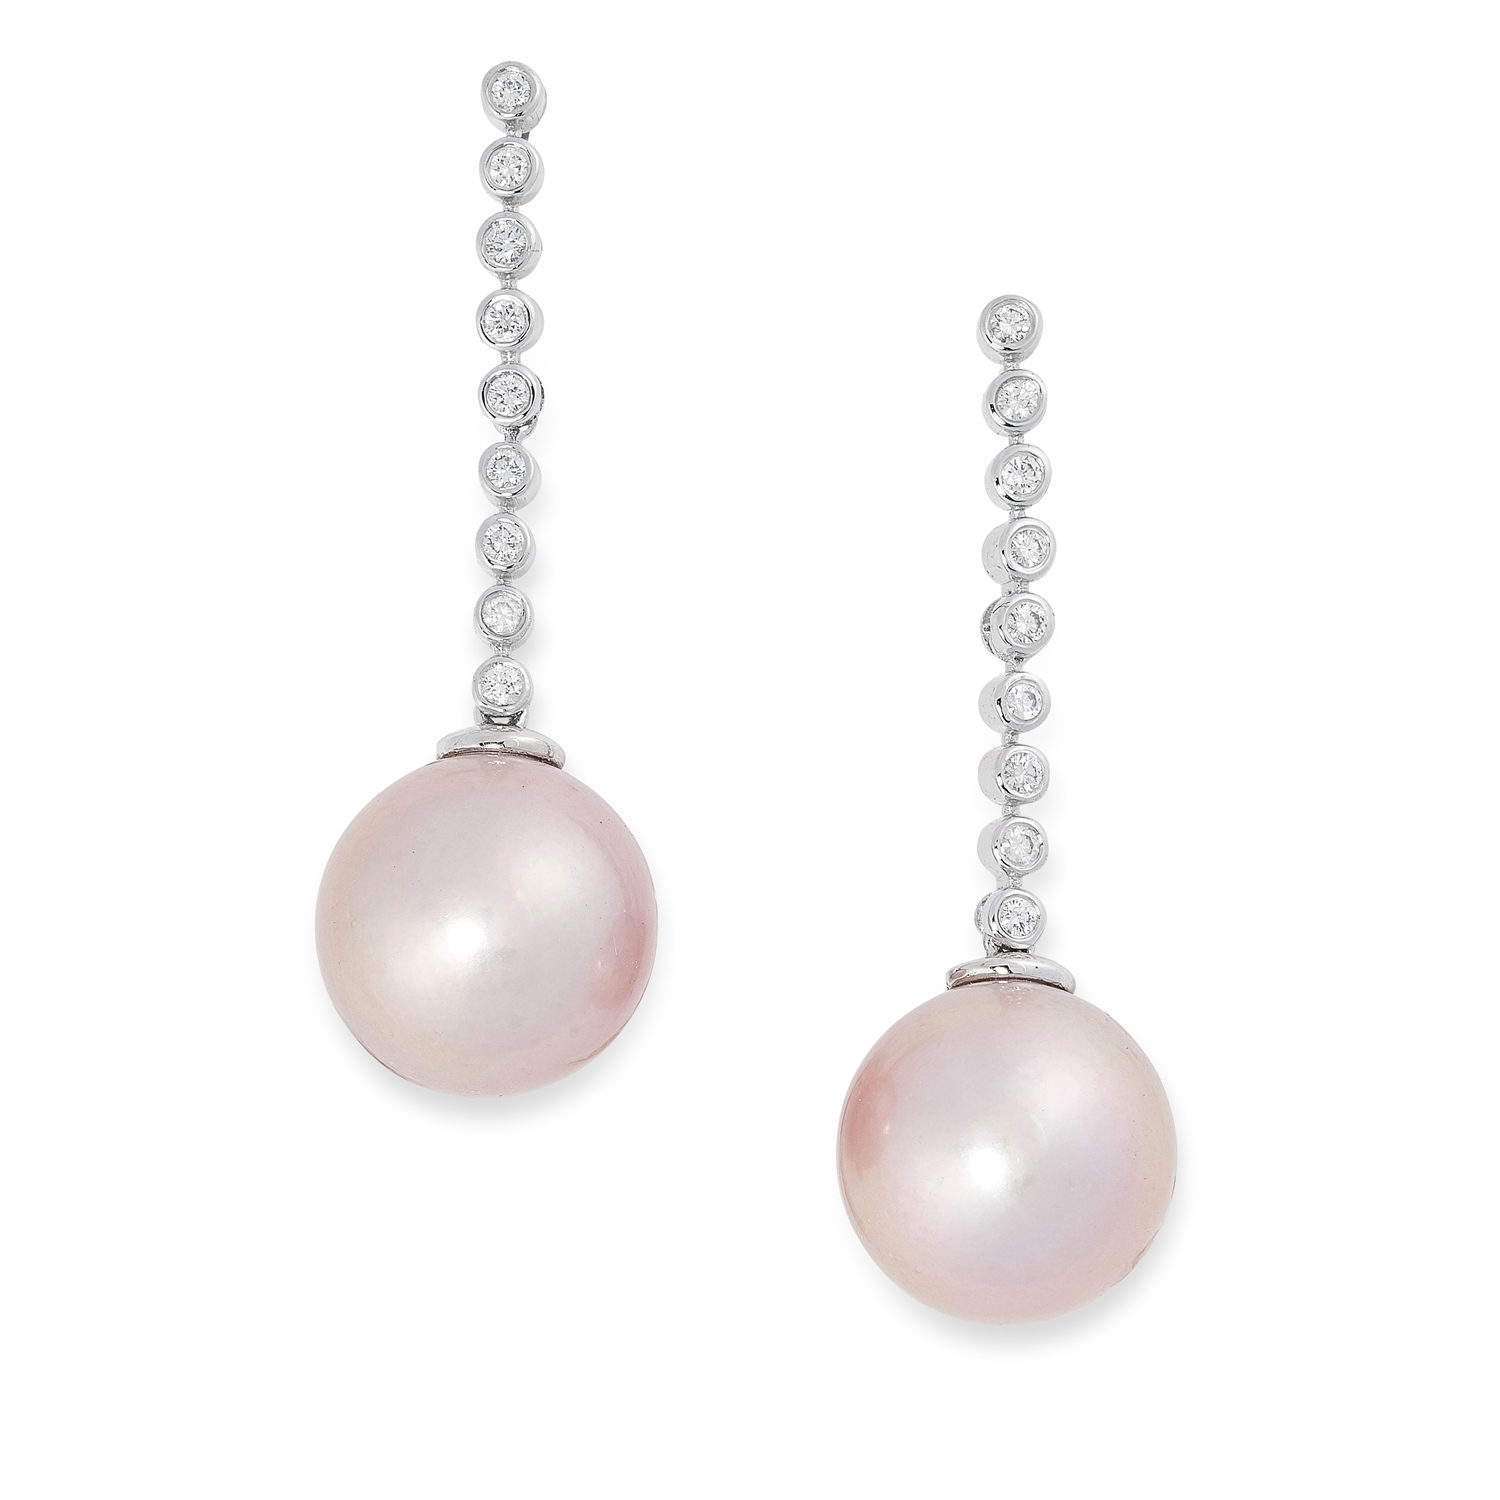 A PAIR OF PEARL AND DIAMOND EARRINGS each set with a pink pearl of 12.5mm below a row of round cut